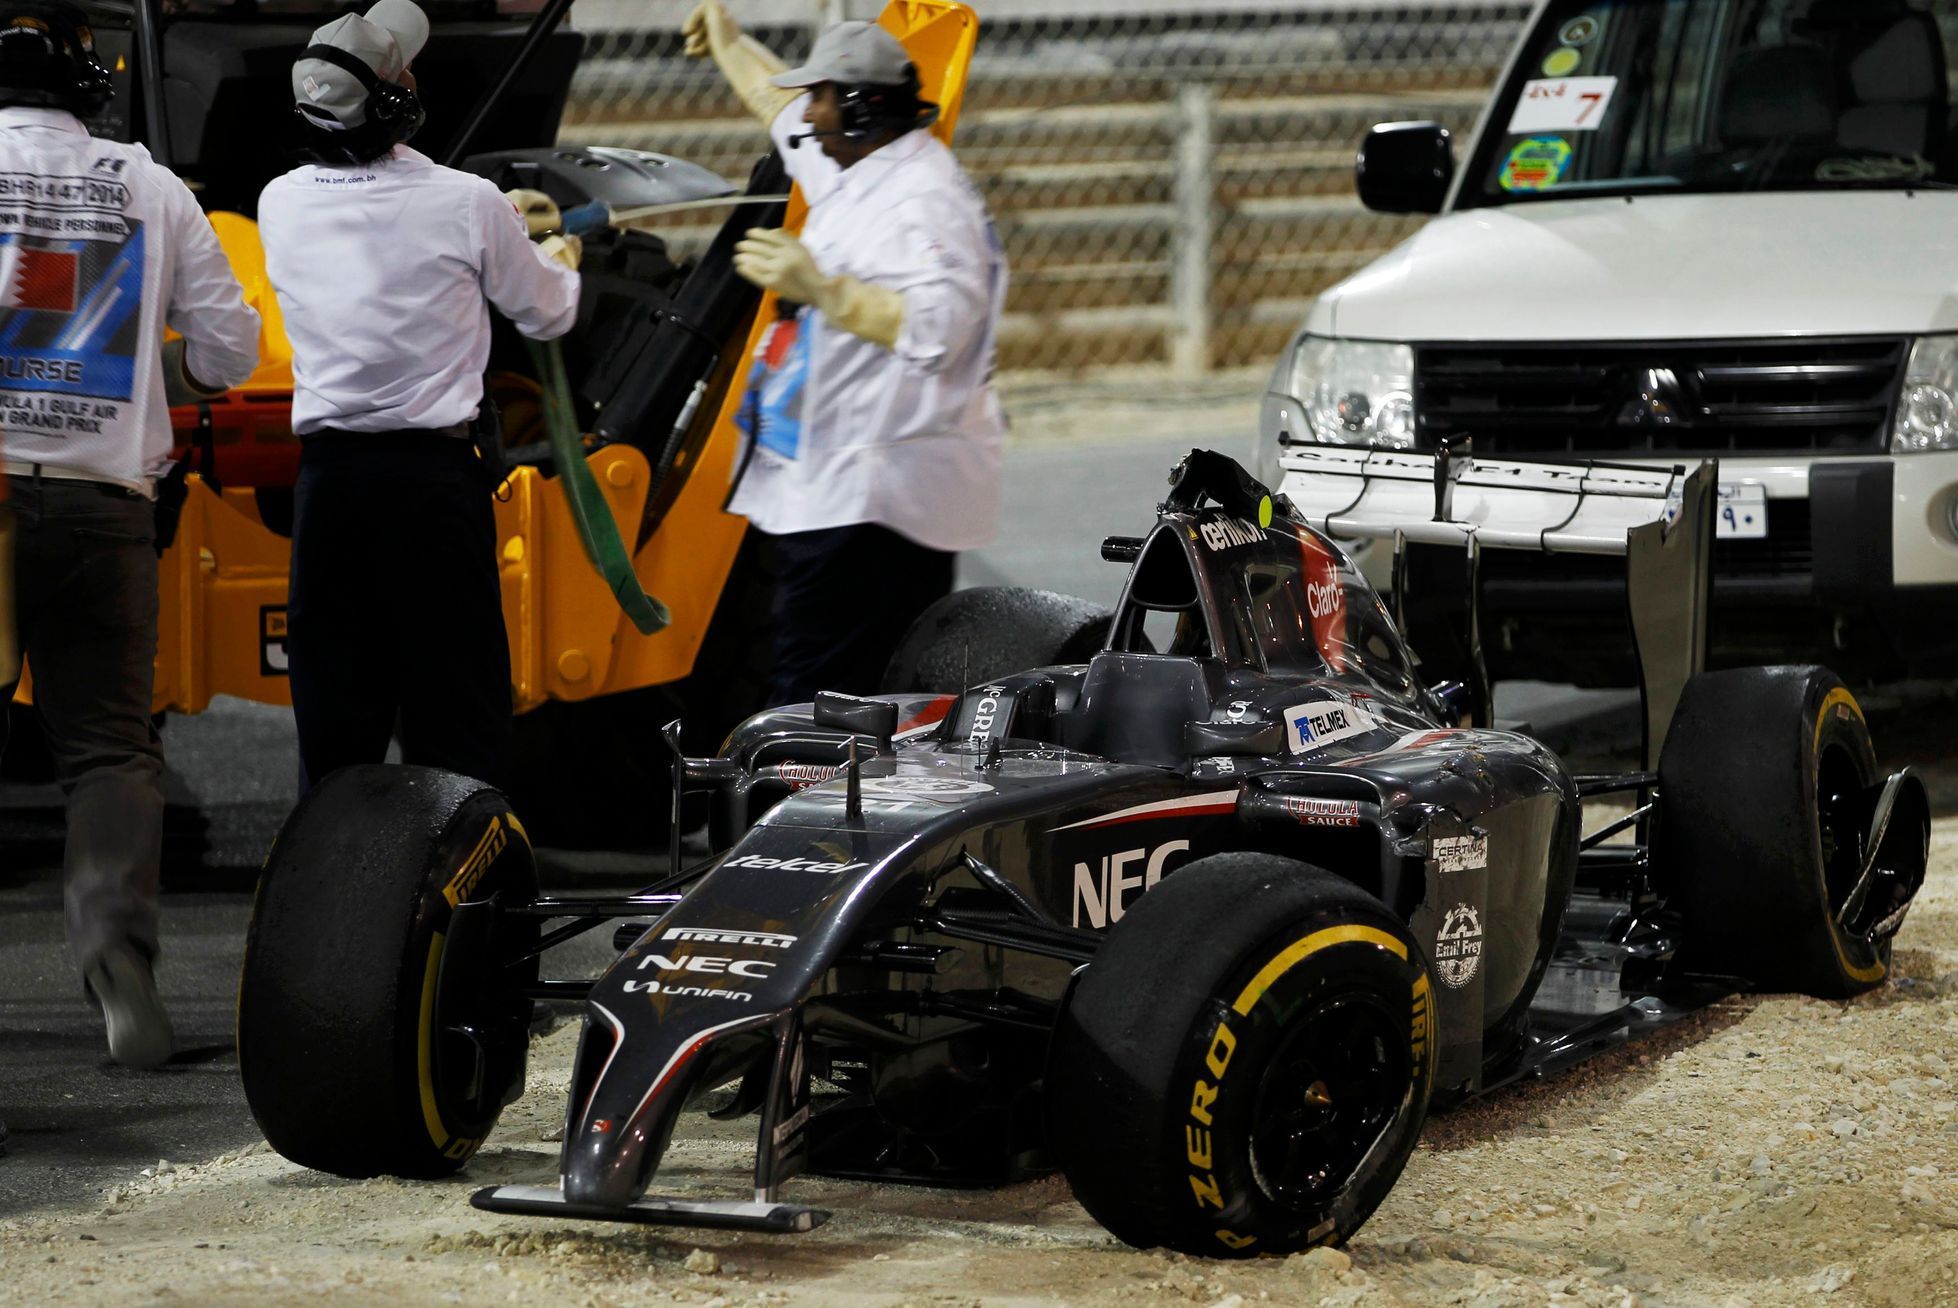 The car of Sauber Formula One driver Esteban Gutierrez of Mexico is removed from the track during the Bahrain F1 Grand Prix at the Bahrain International Circuit (BIC) in Sakhir